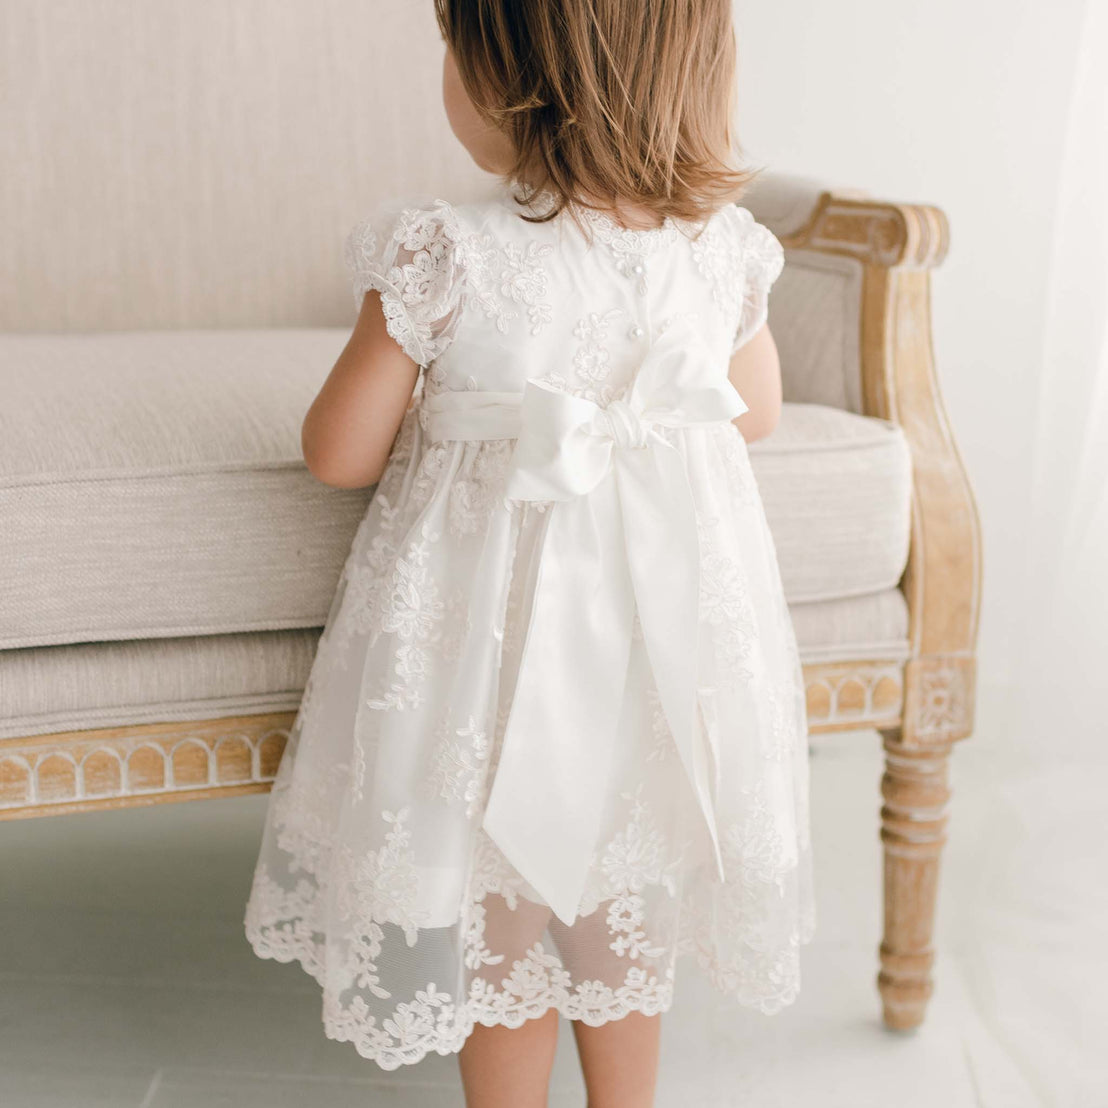 Back detail of Penelope christening dress. Young toddler standing in baptism outfit next to chair.